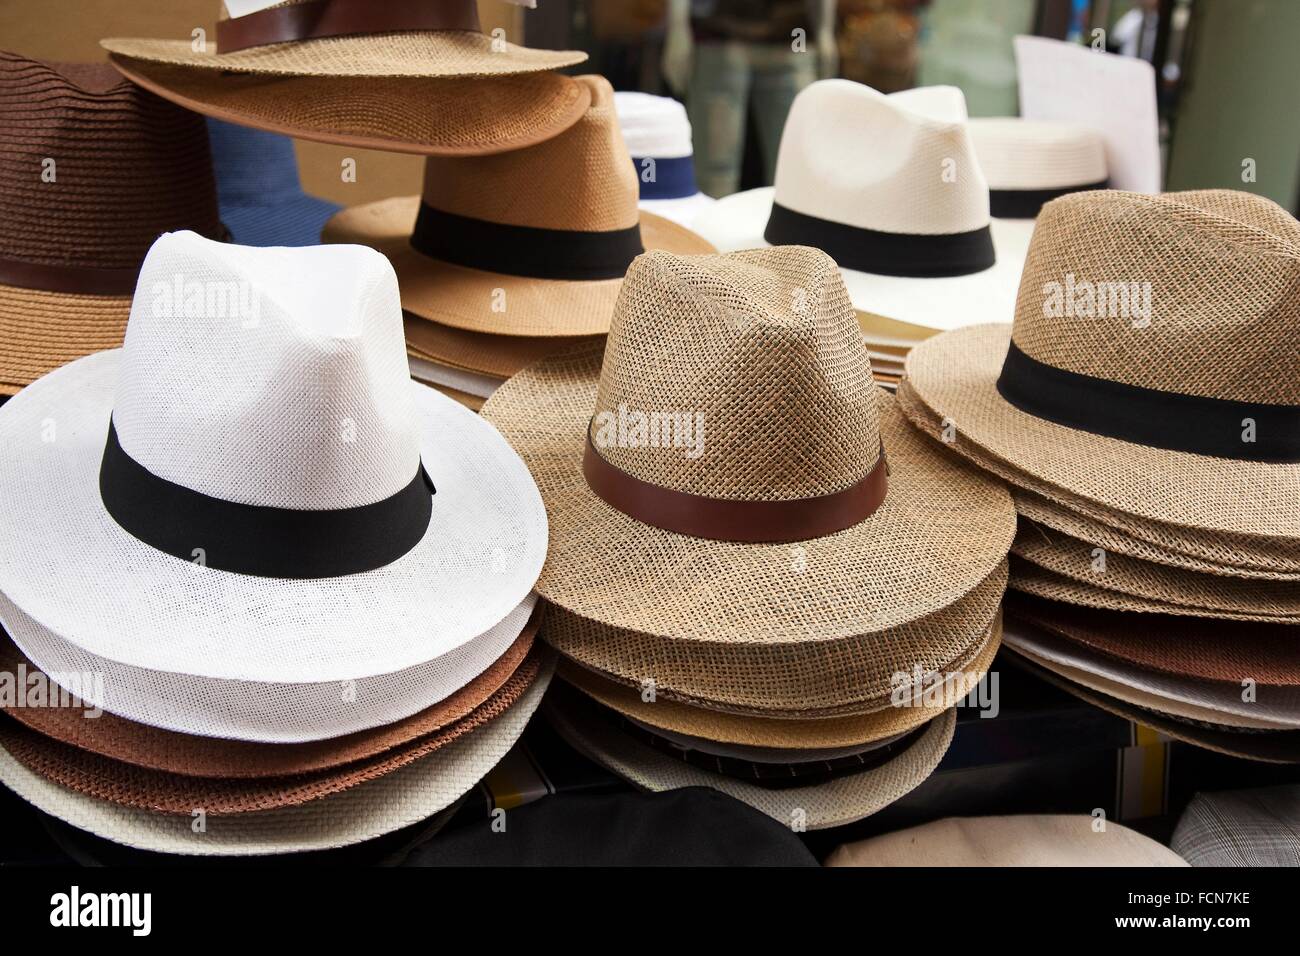 Panama hats for sale at the entrance of a shop, Palermo, Sicily, Italy,  Europe Stock Photo - Alamy